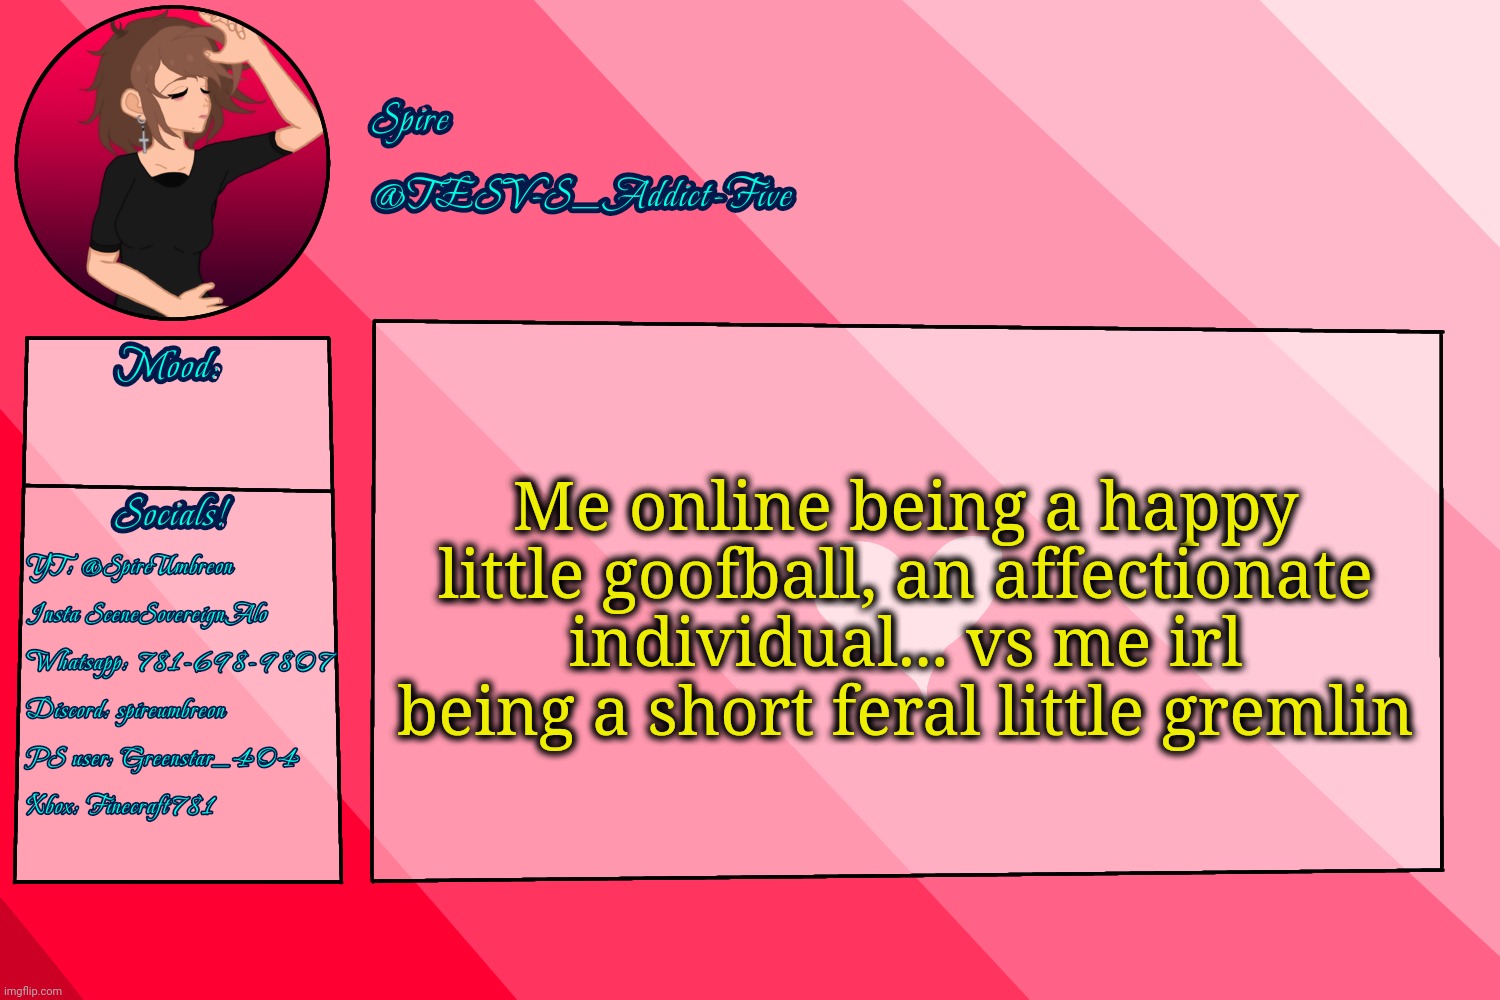 :P | Me online being a happy little goofball, an affectionate individual... vs me irl being a short feral little gremlin | image tagged in tesv-s_addict-five announcement template | made w/ Imgflip meme maker